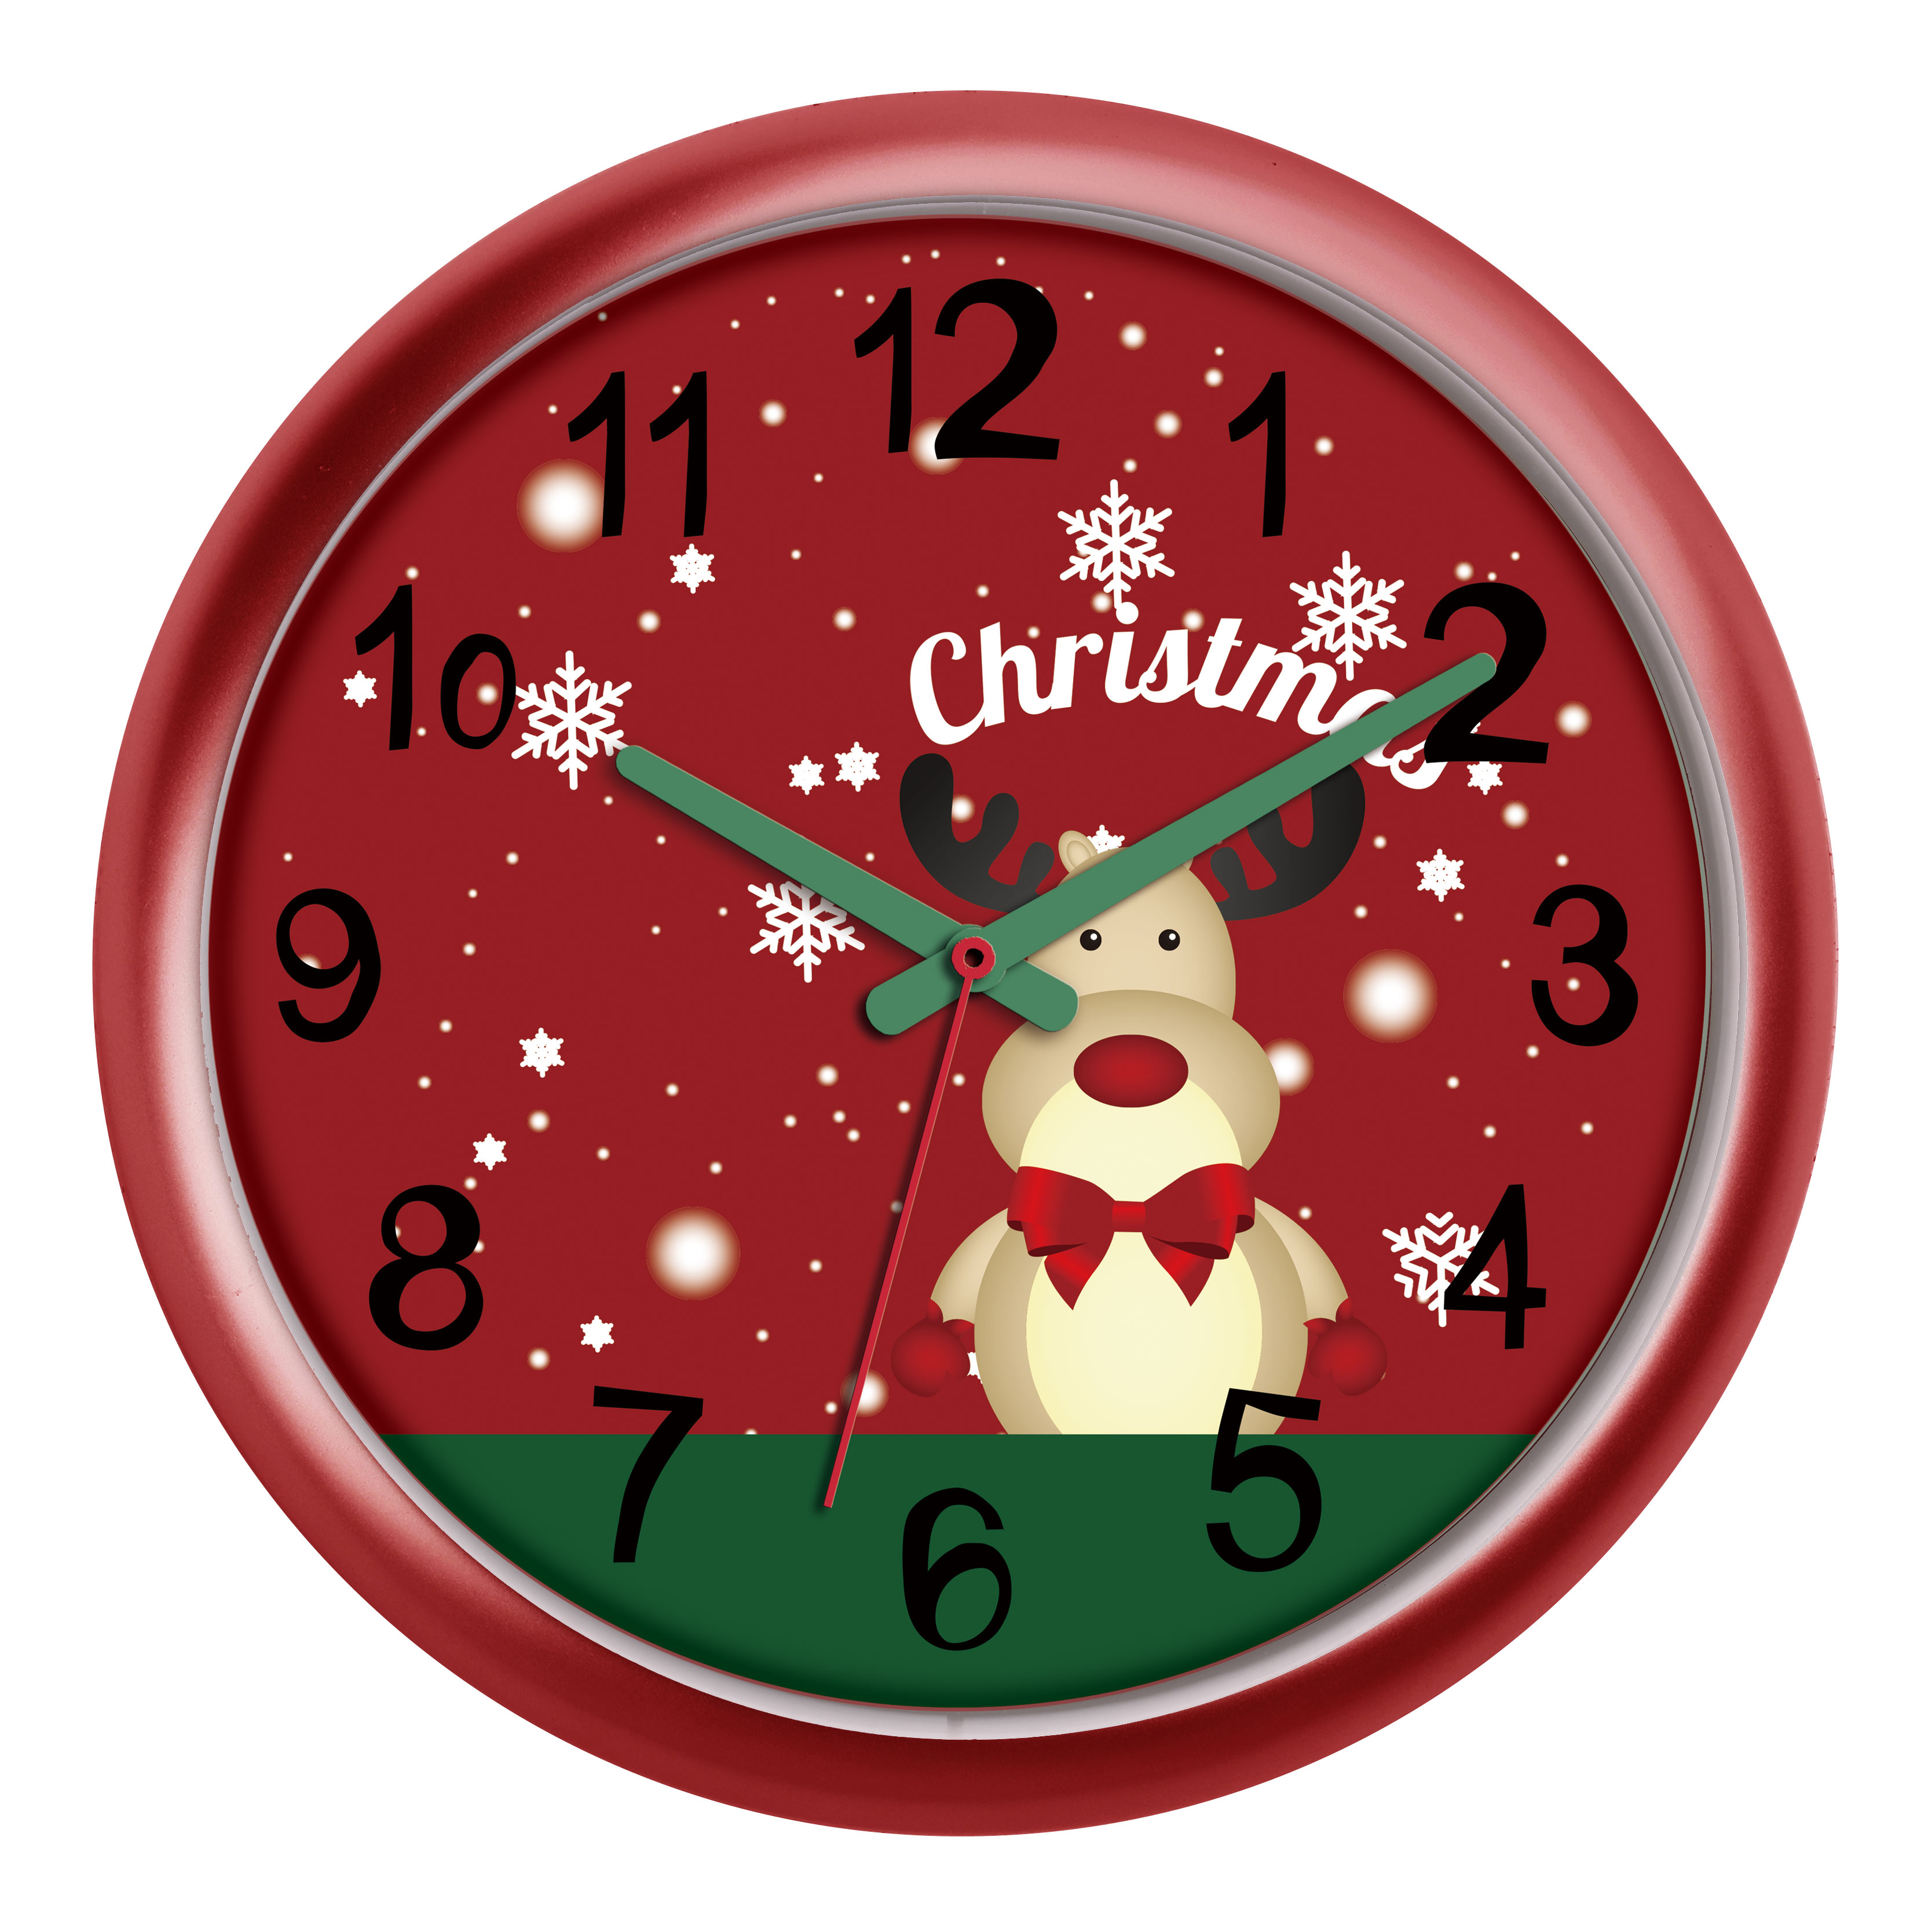 10 Inch Musical Christmas Wall Clock with hourly chime